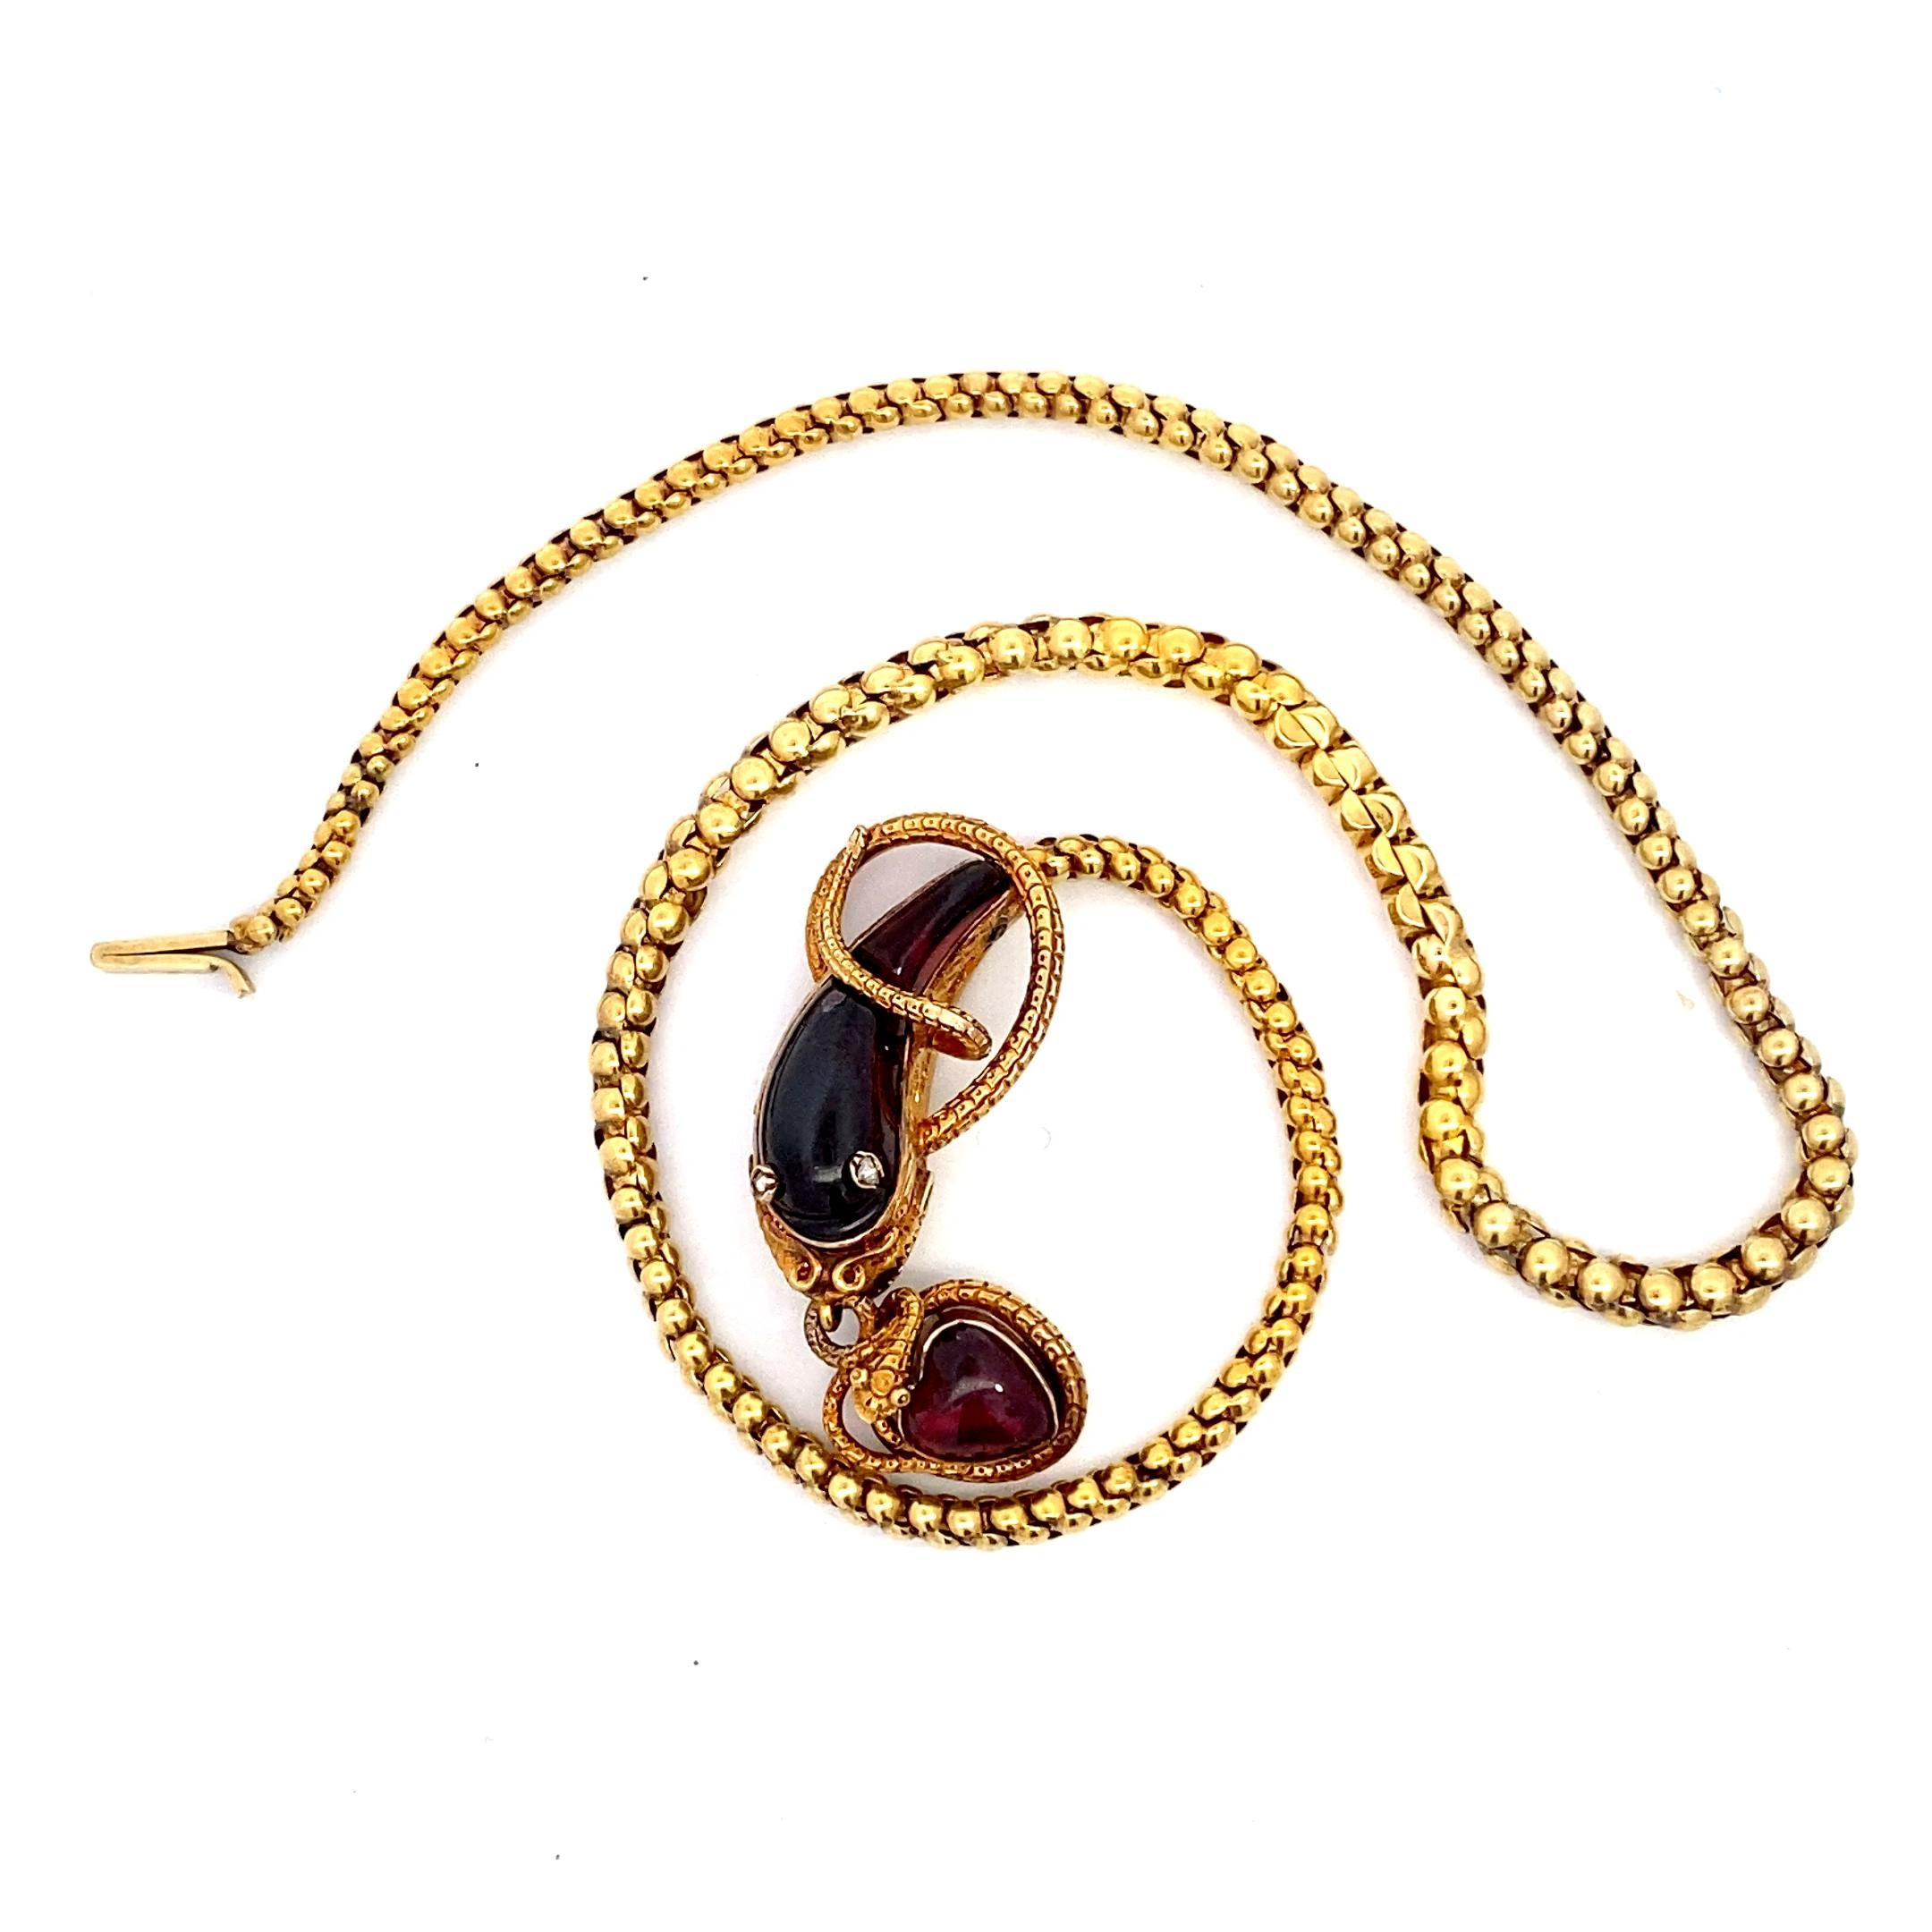 Antique Victorian Snake Necklace 15k, Garnet Head with Original Box In Good Condition For Sale In Brooklyn, NY